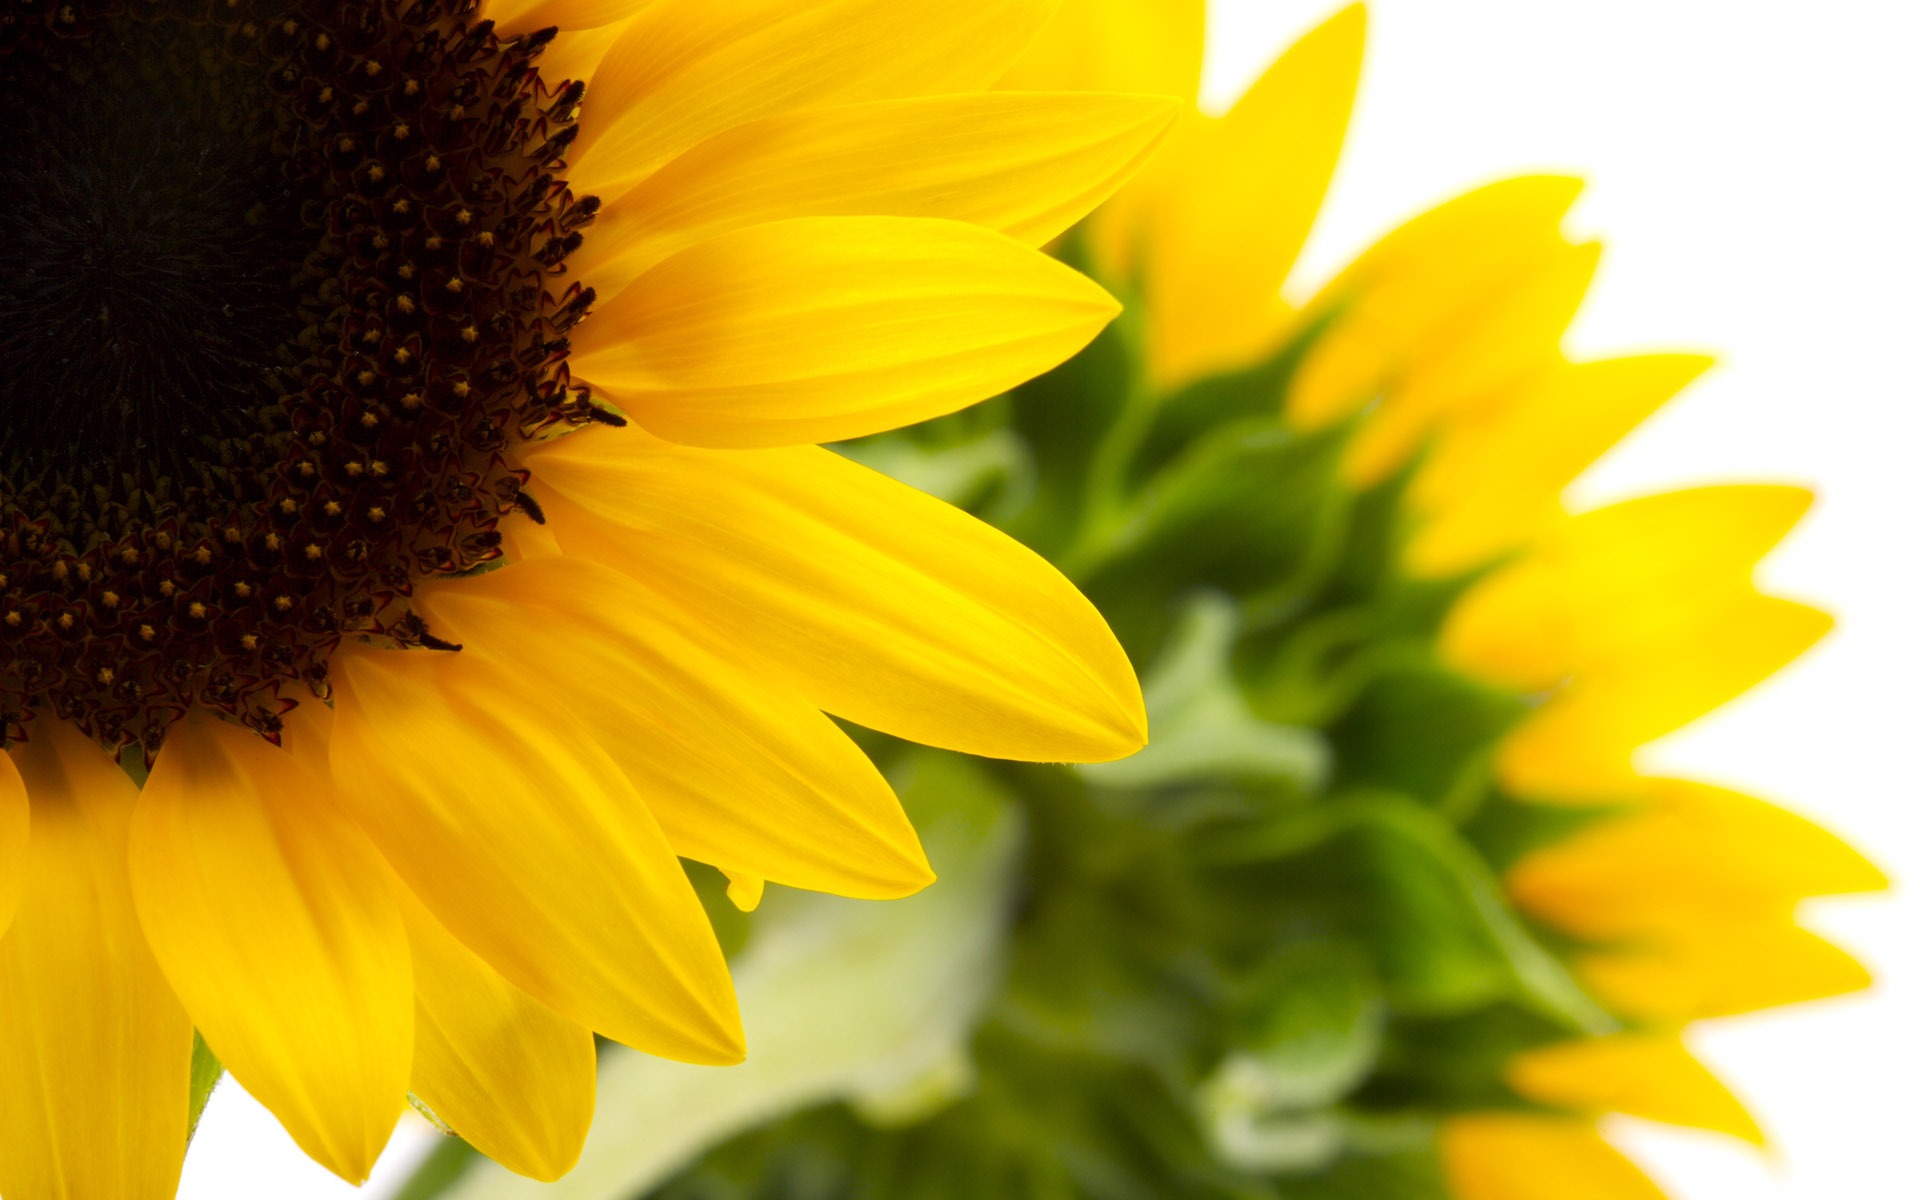 Sunny sunflower photo HD Wallpapers #26 - 1920x1200